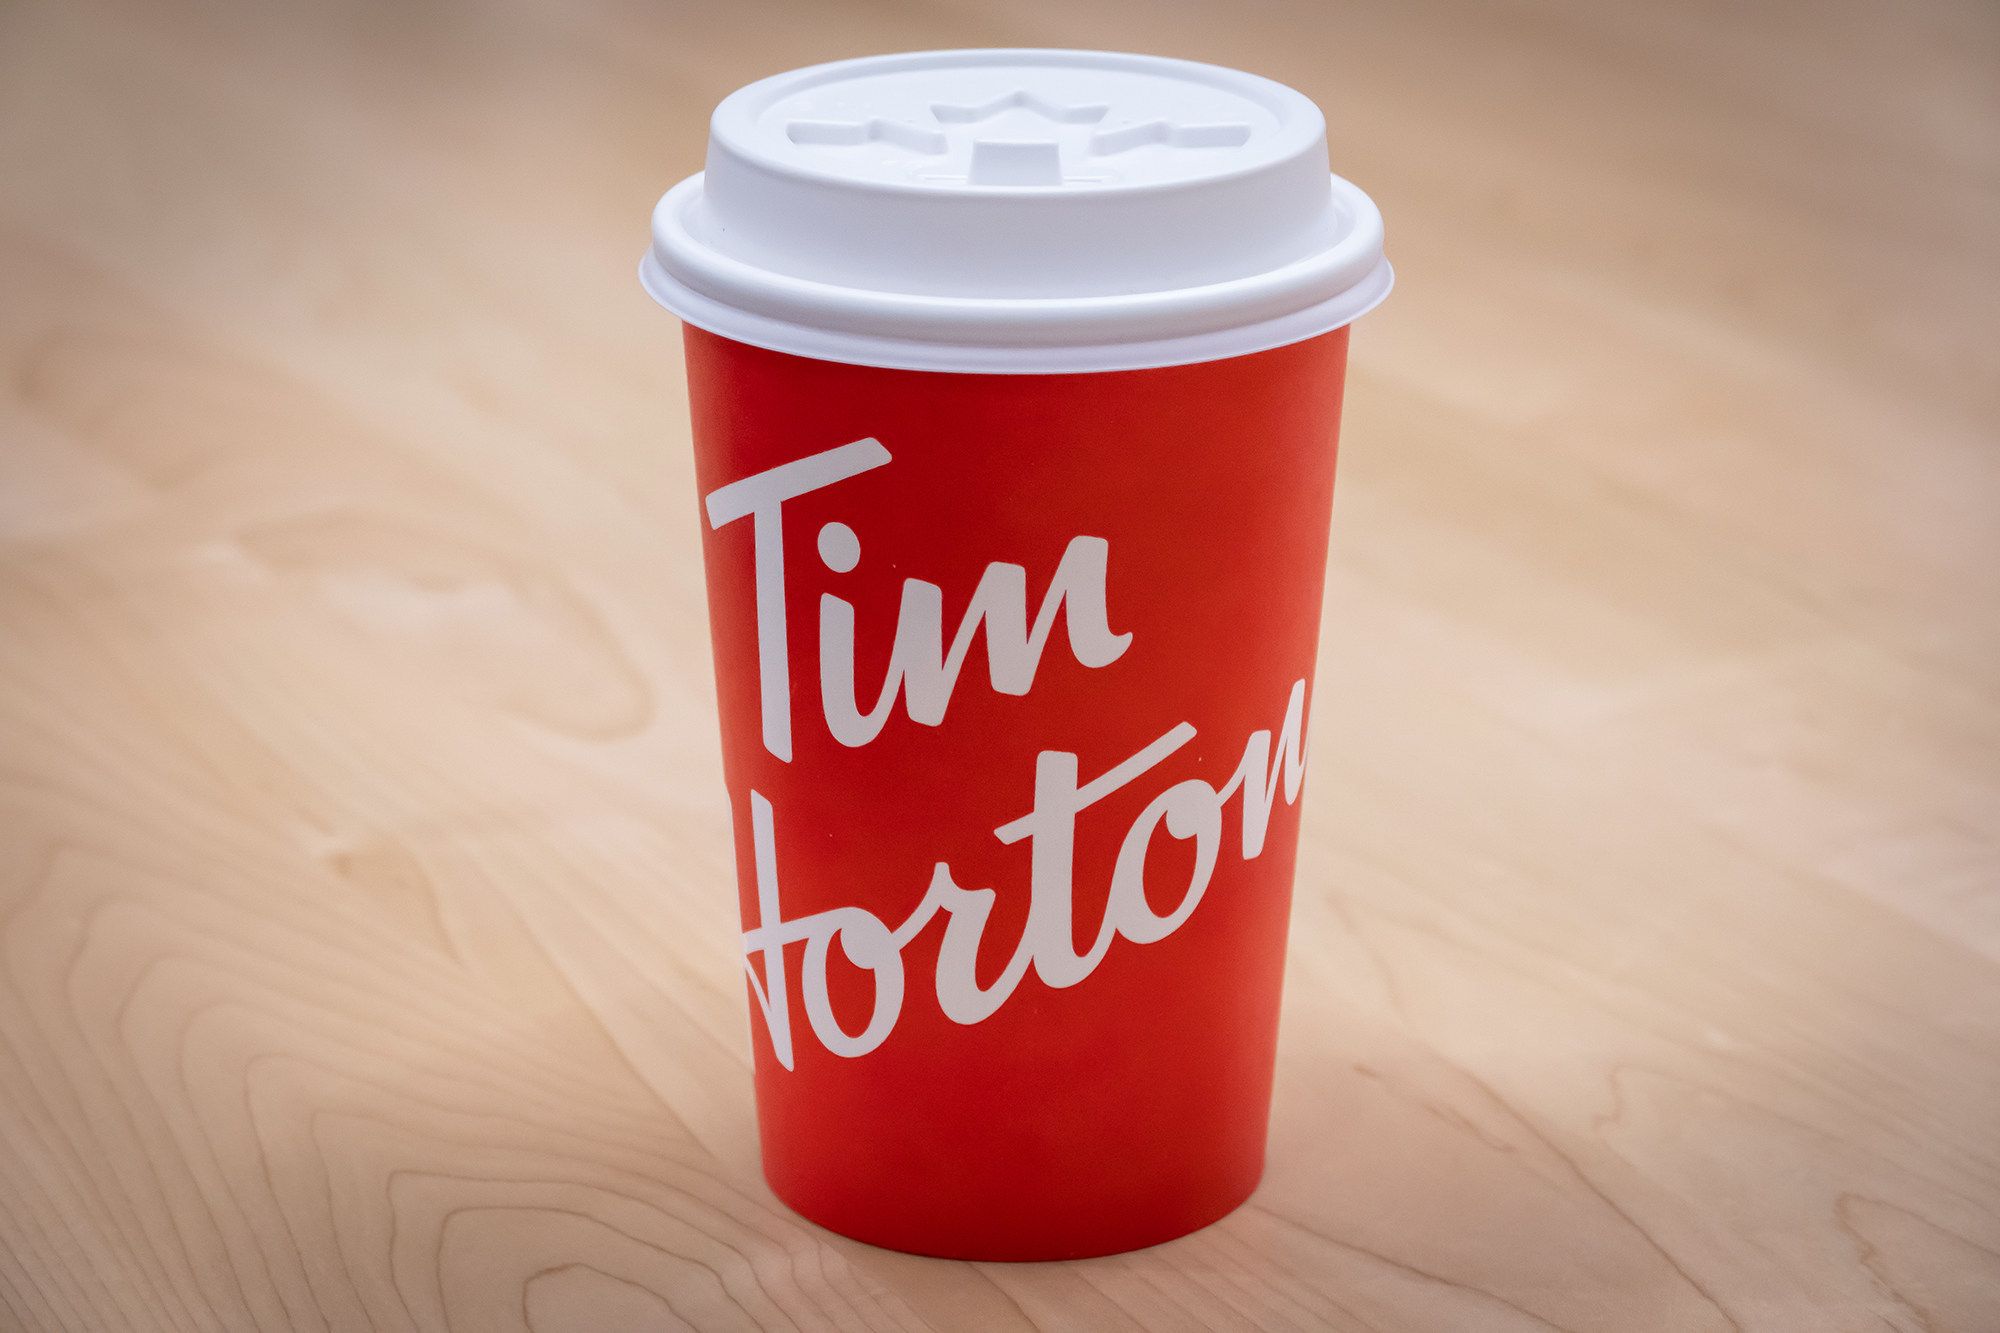 Tim Hortons introduces new white hot beverage lids as part of its Tims